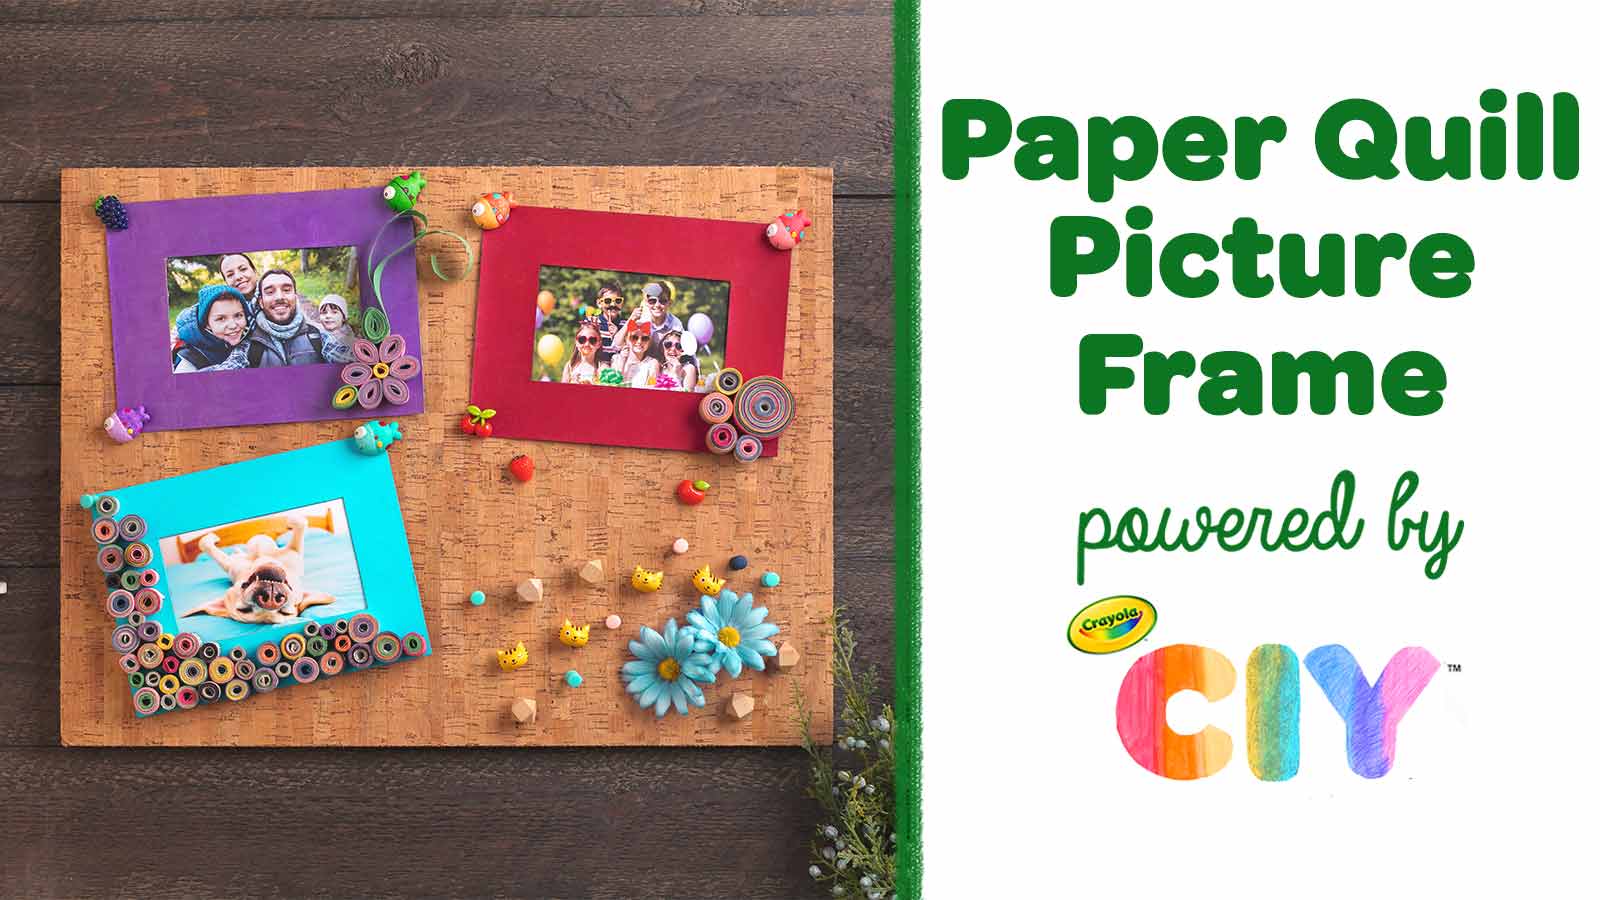 Paper Quill Picture Frame CIY Video Poster Frame